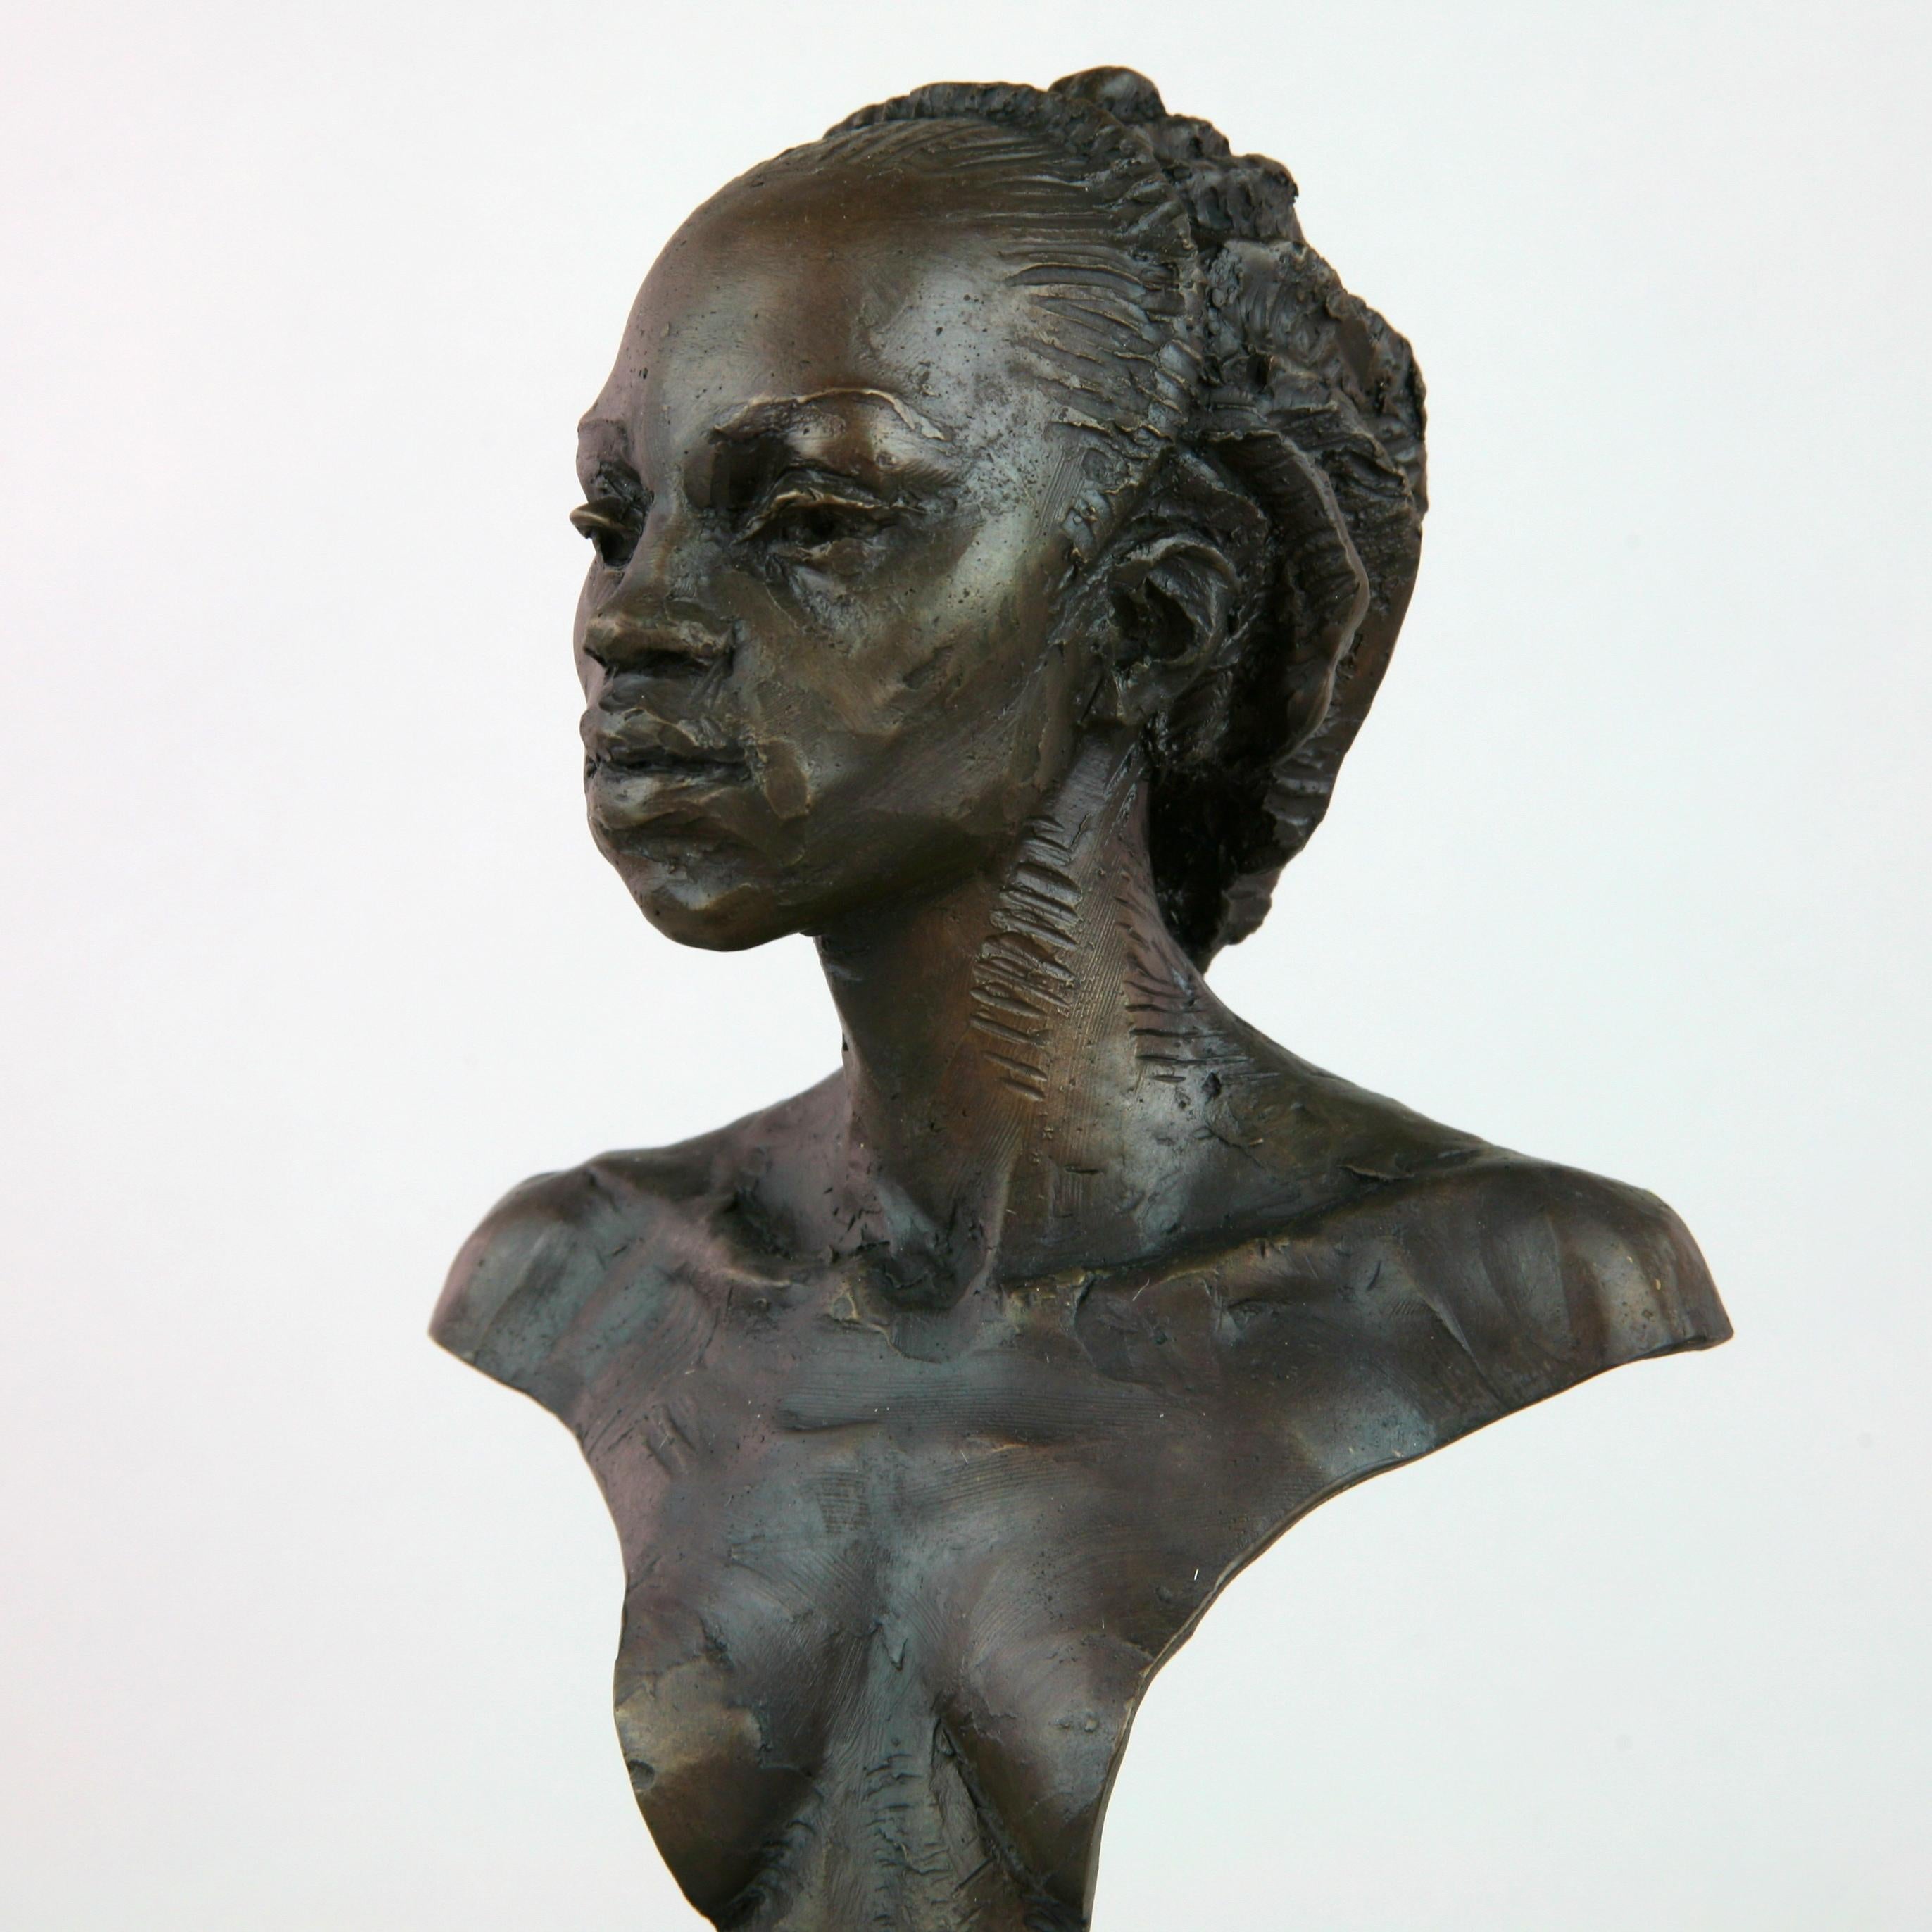 Woman Warrior of Kau Bust - standing sculpture limited edition bronze art modern - Abstract Impressionist Sculpture by Andrzej Szymczyk